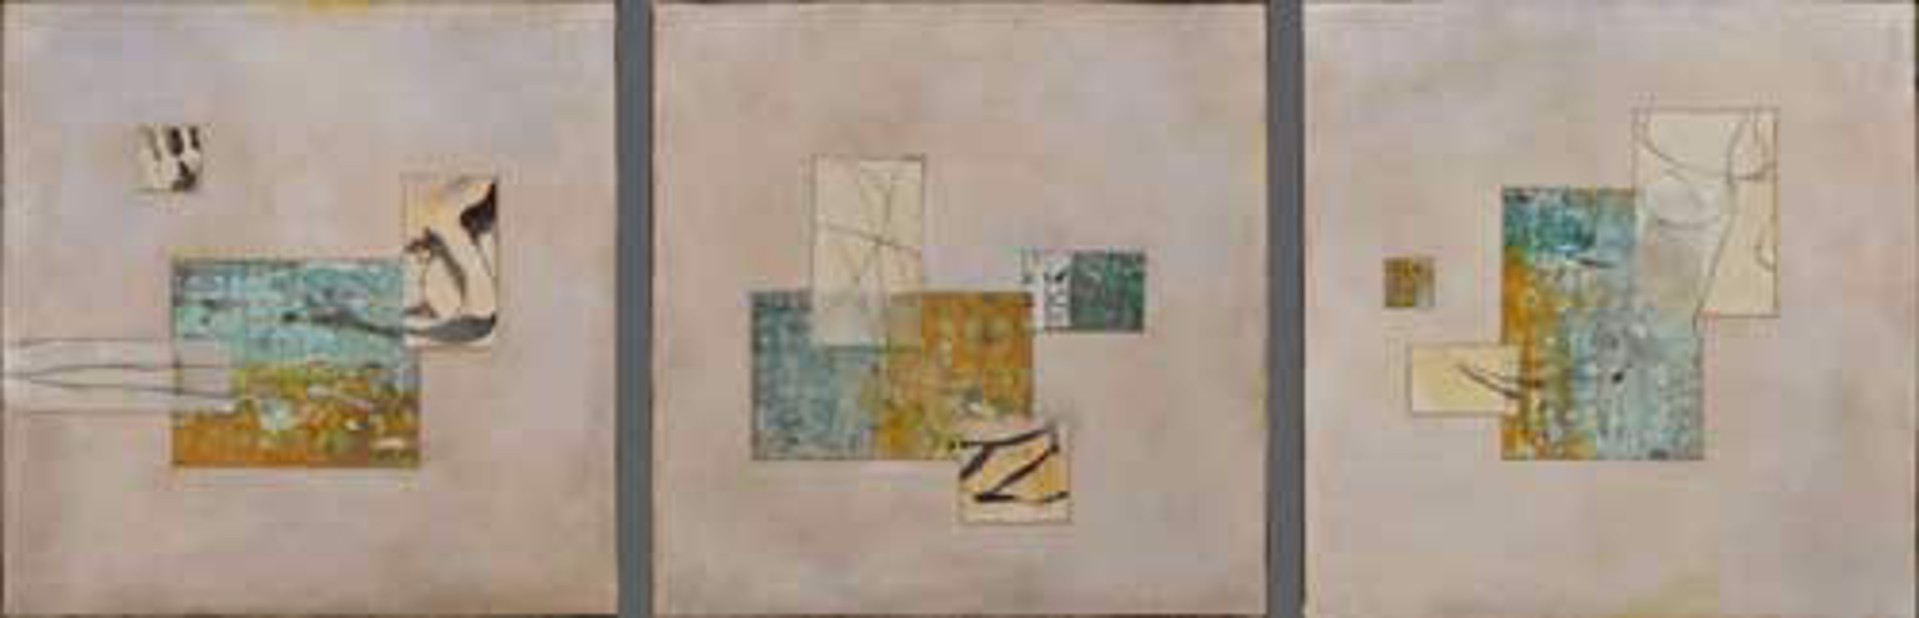 Radicle 41, 42, 43 by Tracey Adams